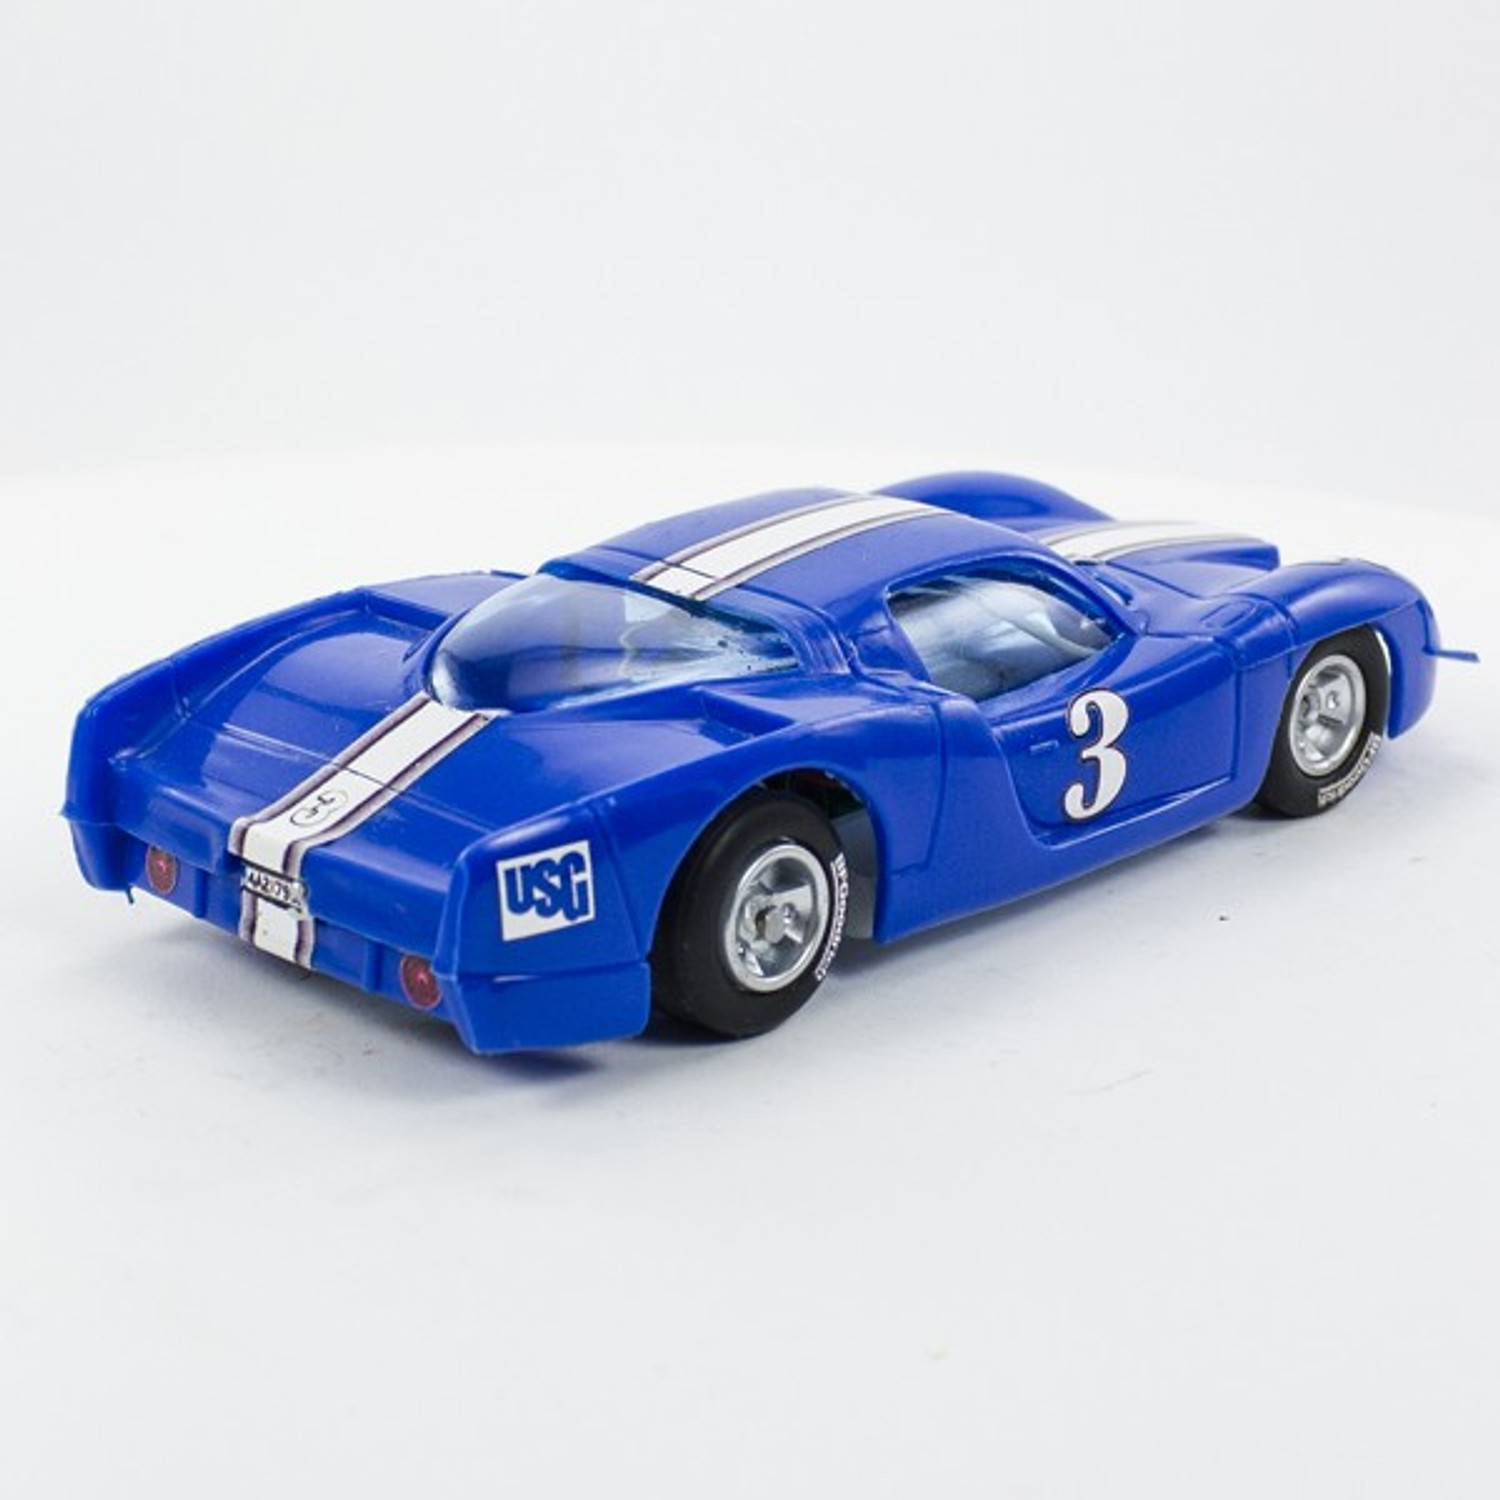 Stock Number: 16118 - Blue Number 3 Car by Unknown